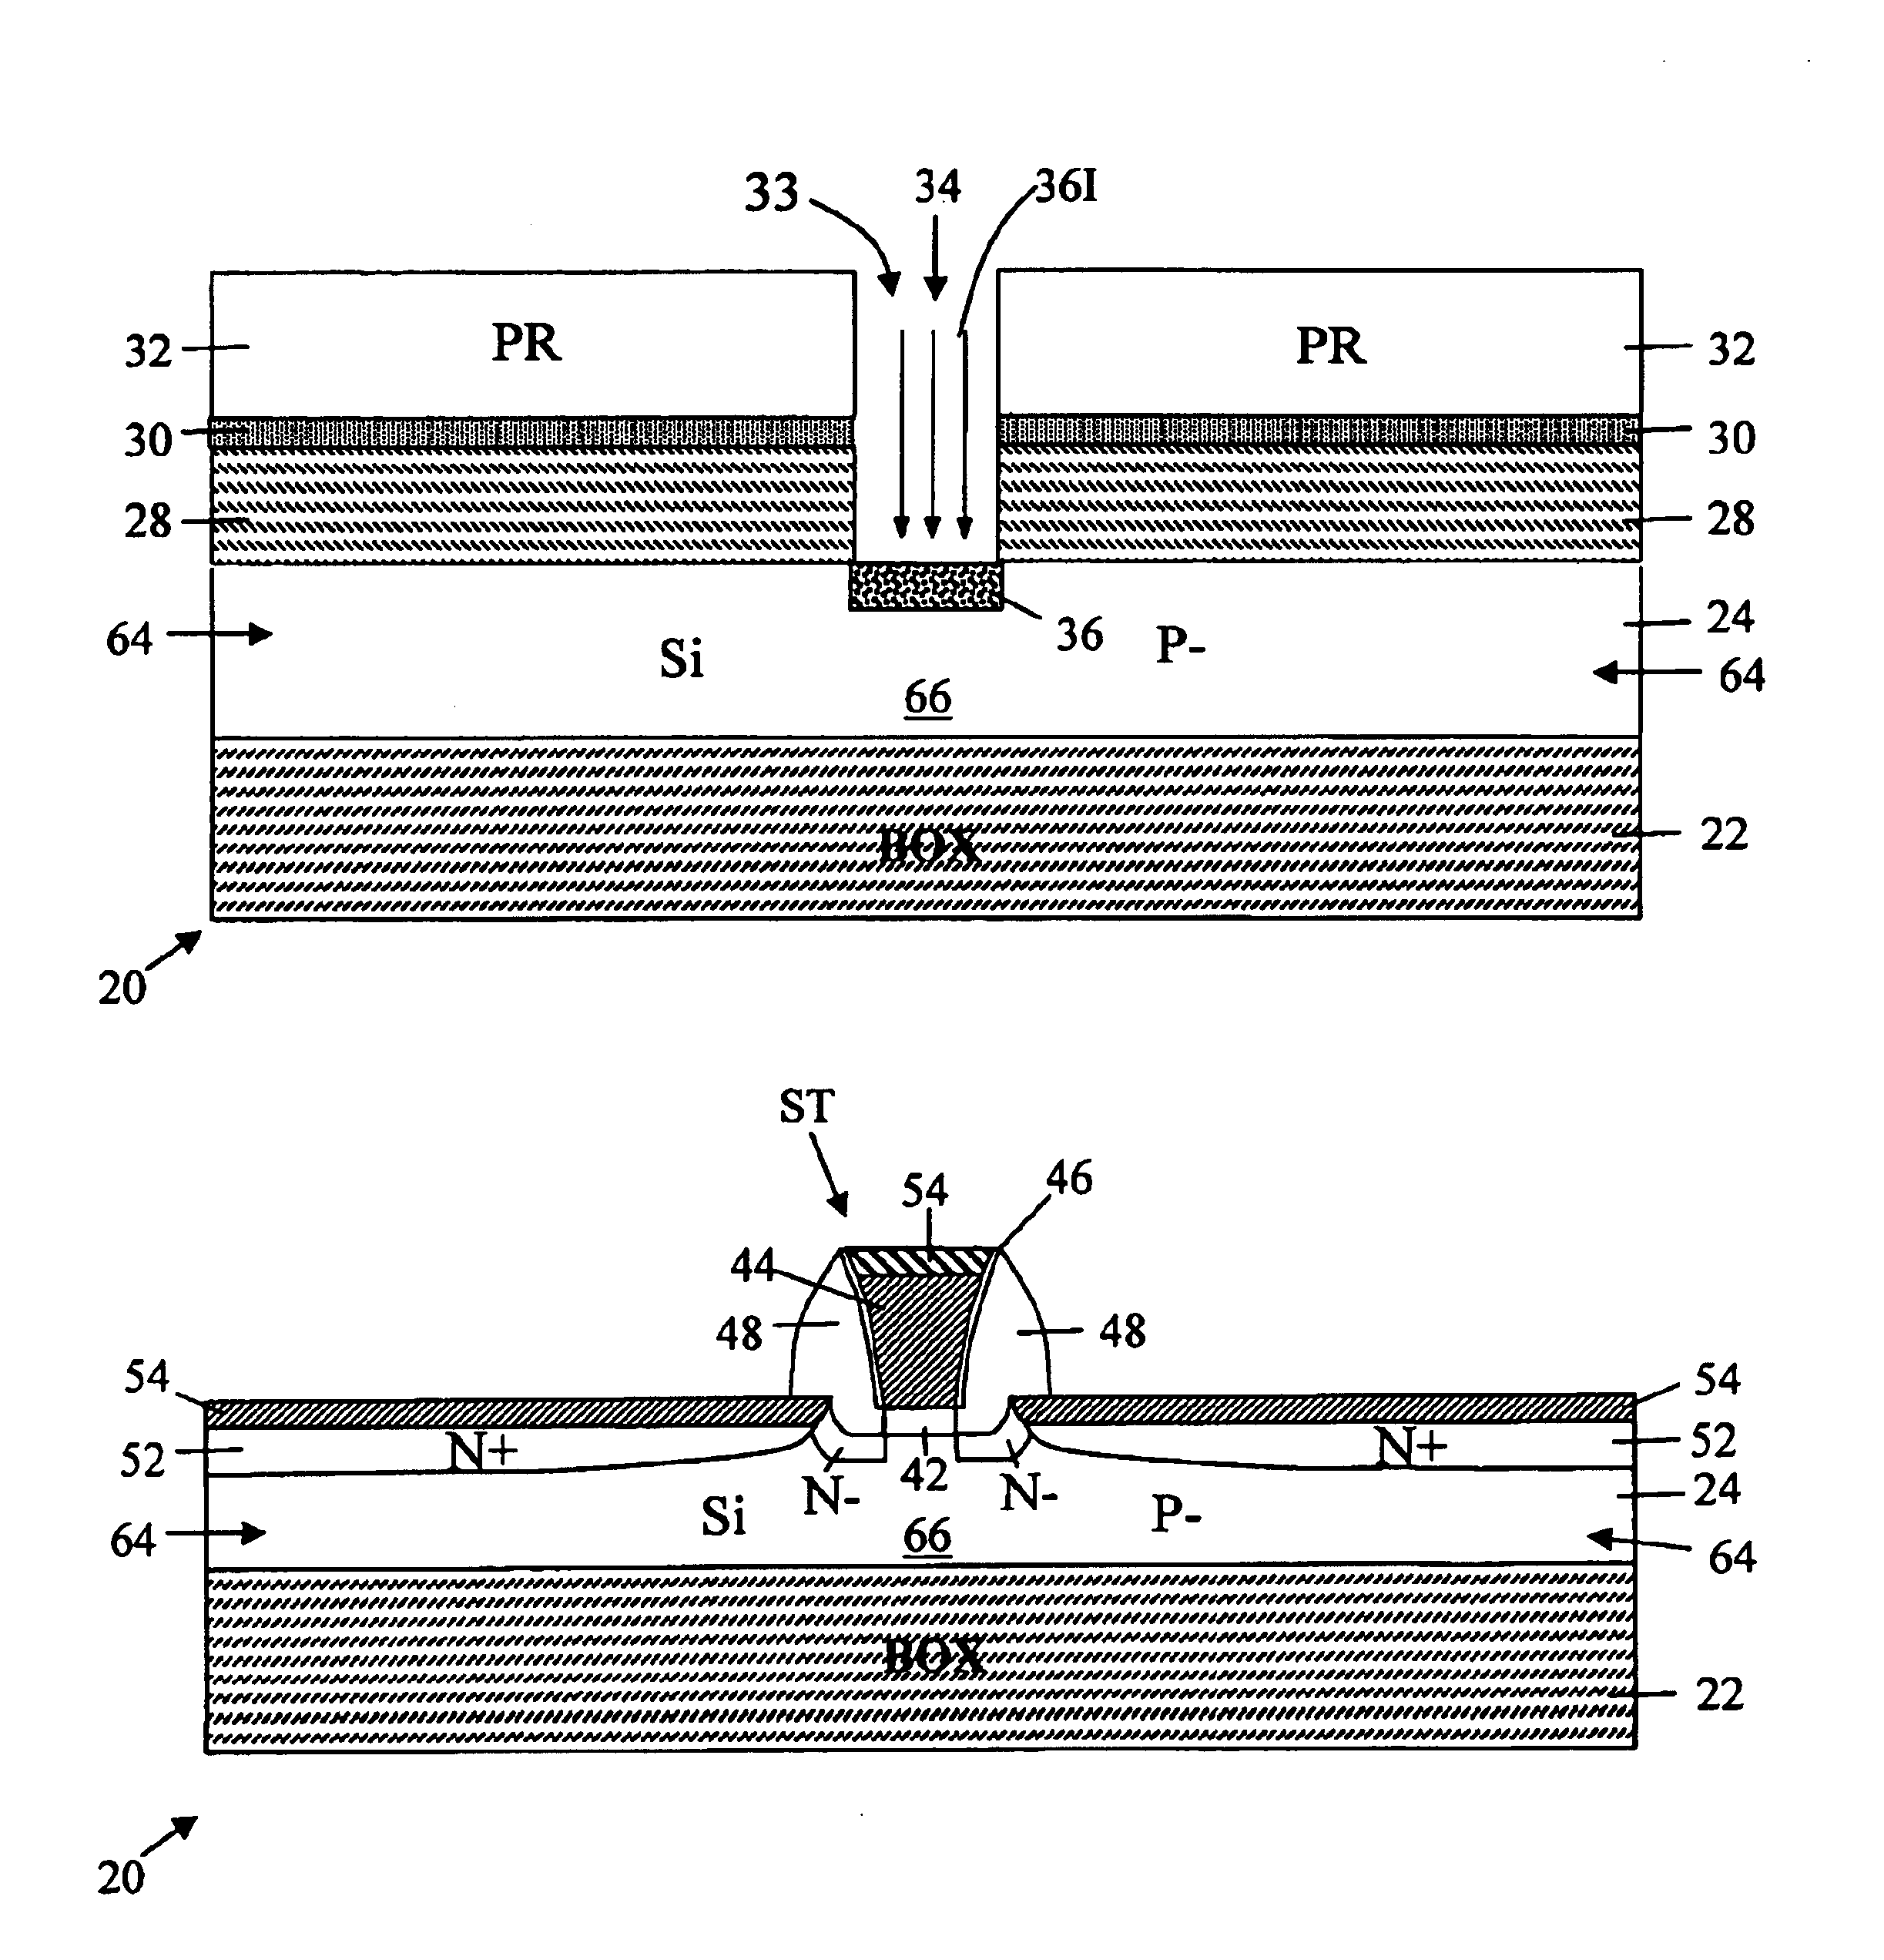 Method of forming an electronic device on a recess in the surface of a thin film of silicon etched to a precise thickness